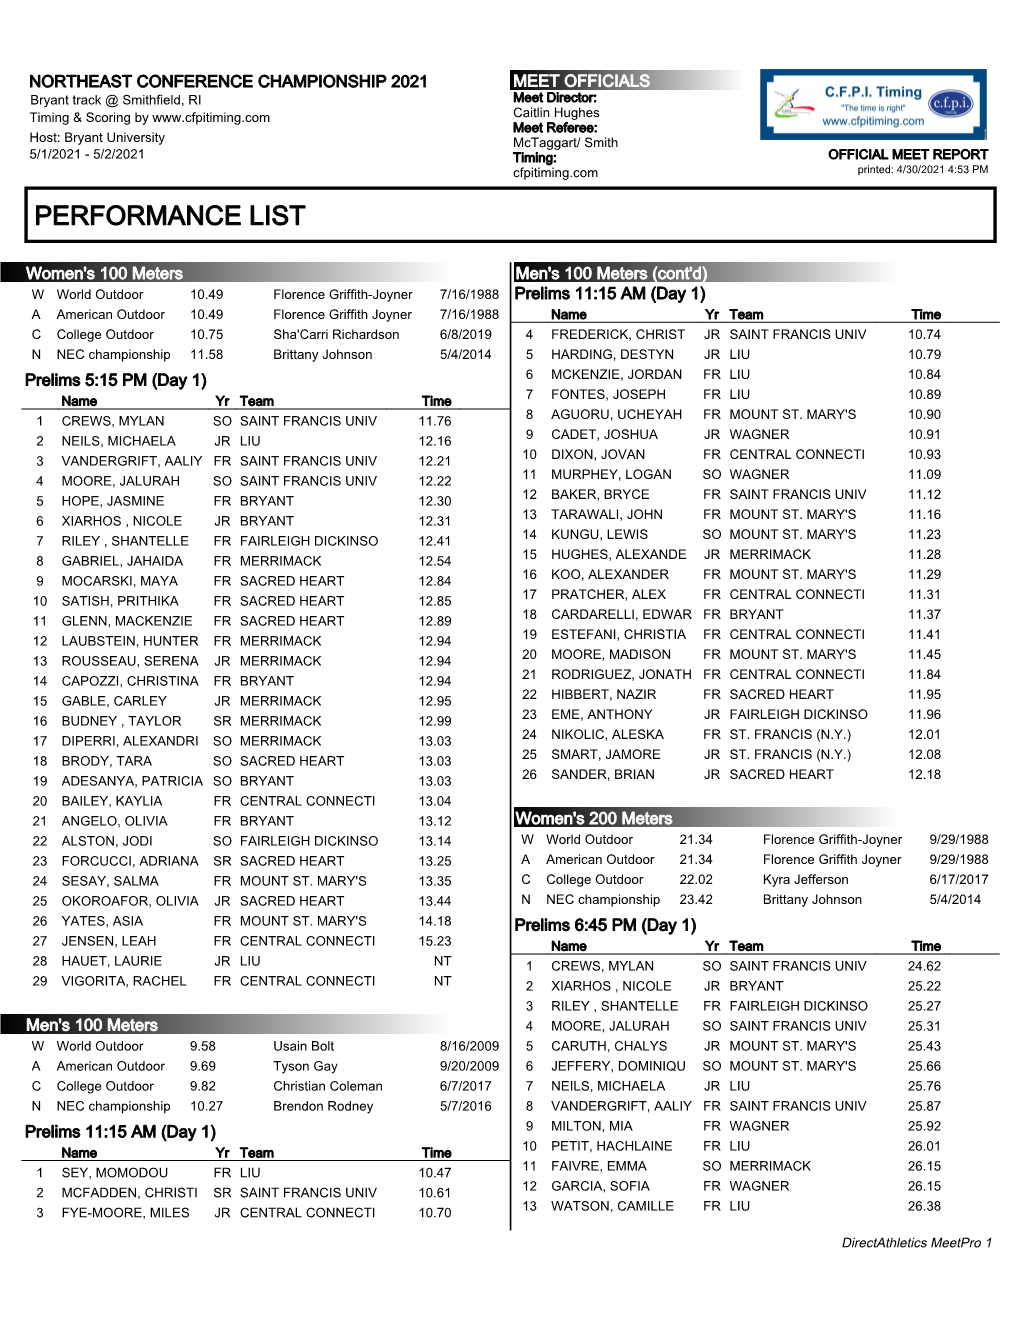 Performance List of Entries